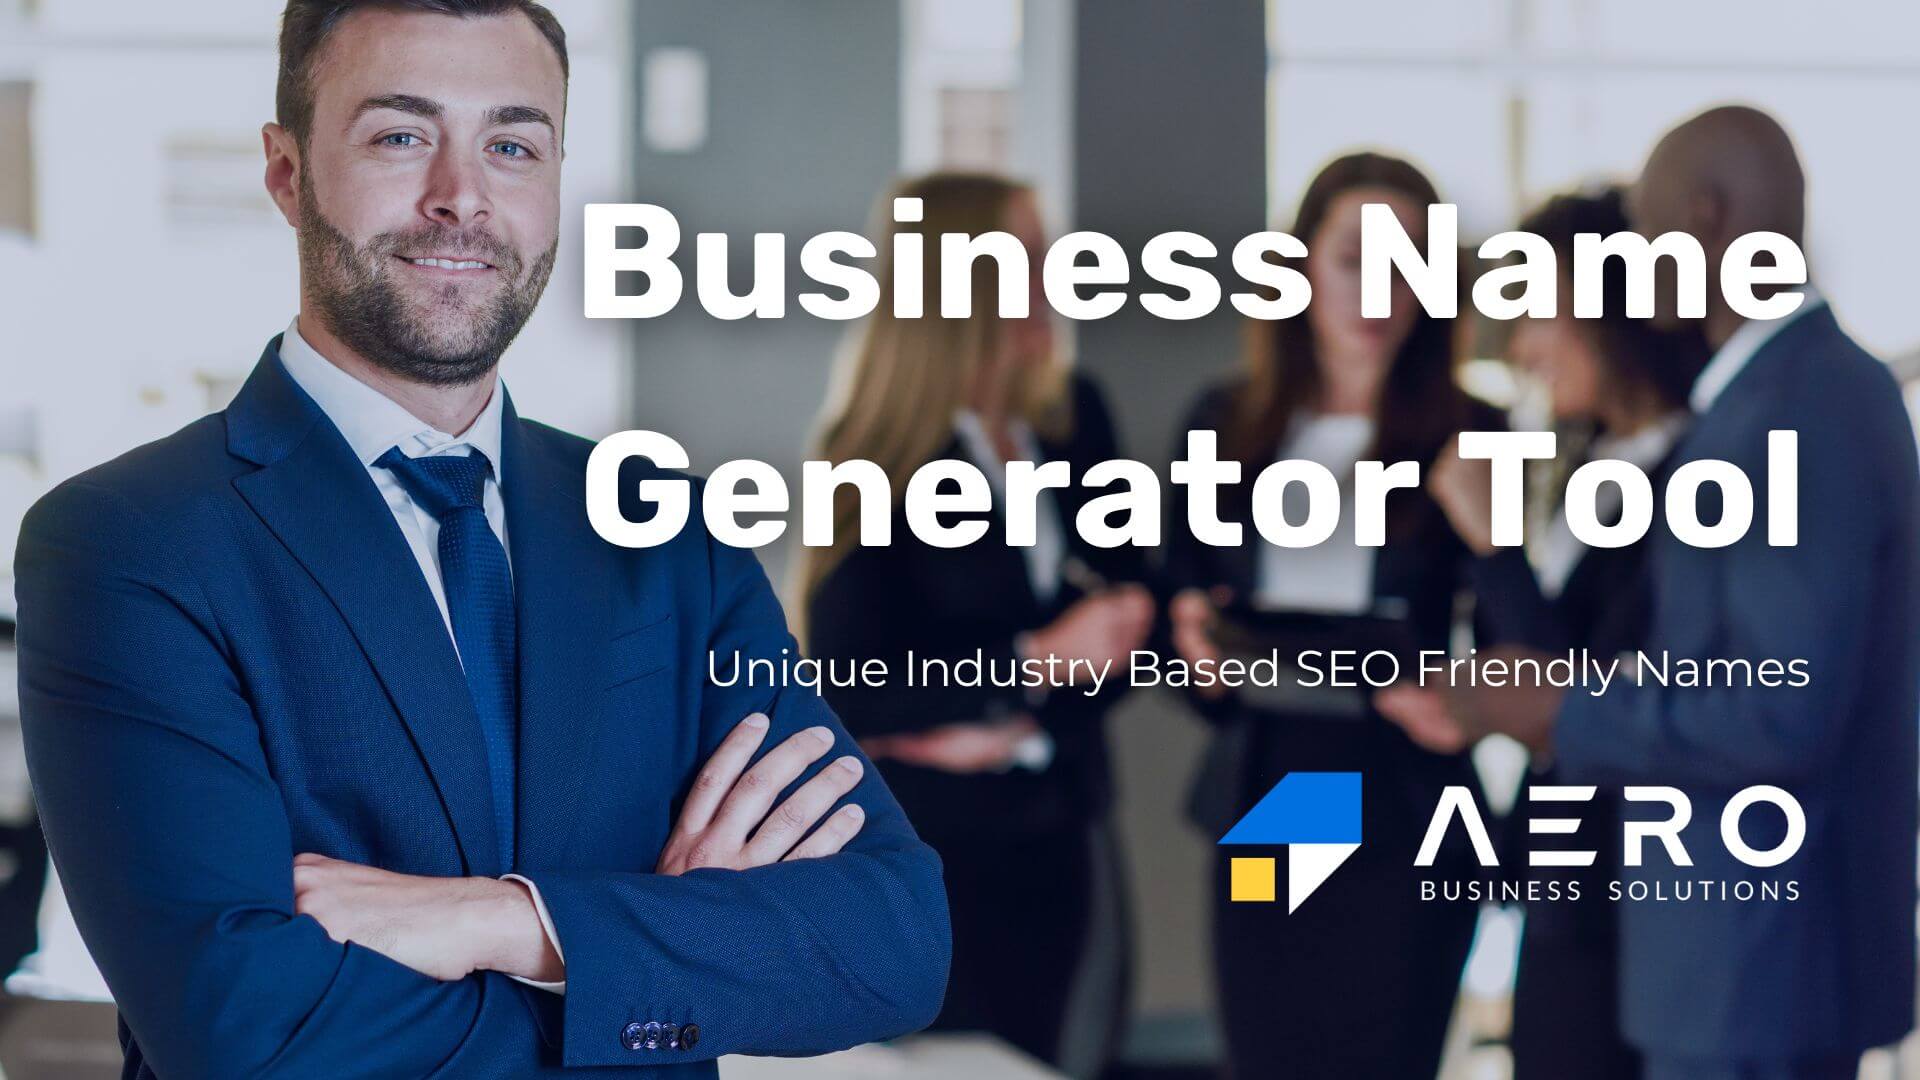 Free and online business name generator tool by ABS. Unique industry based and SEO friendly business name generator tool.